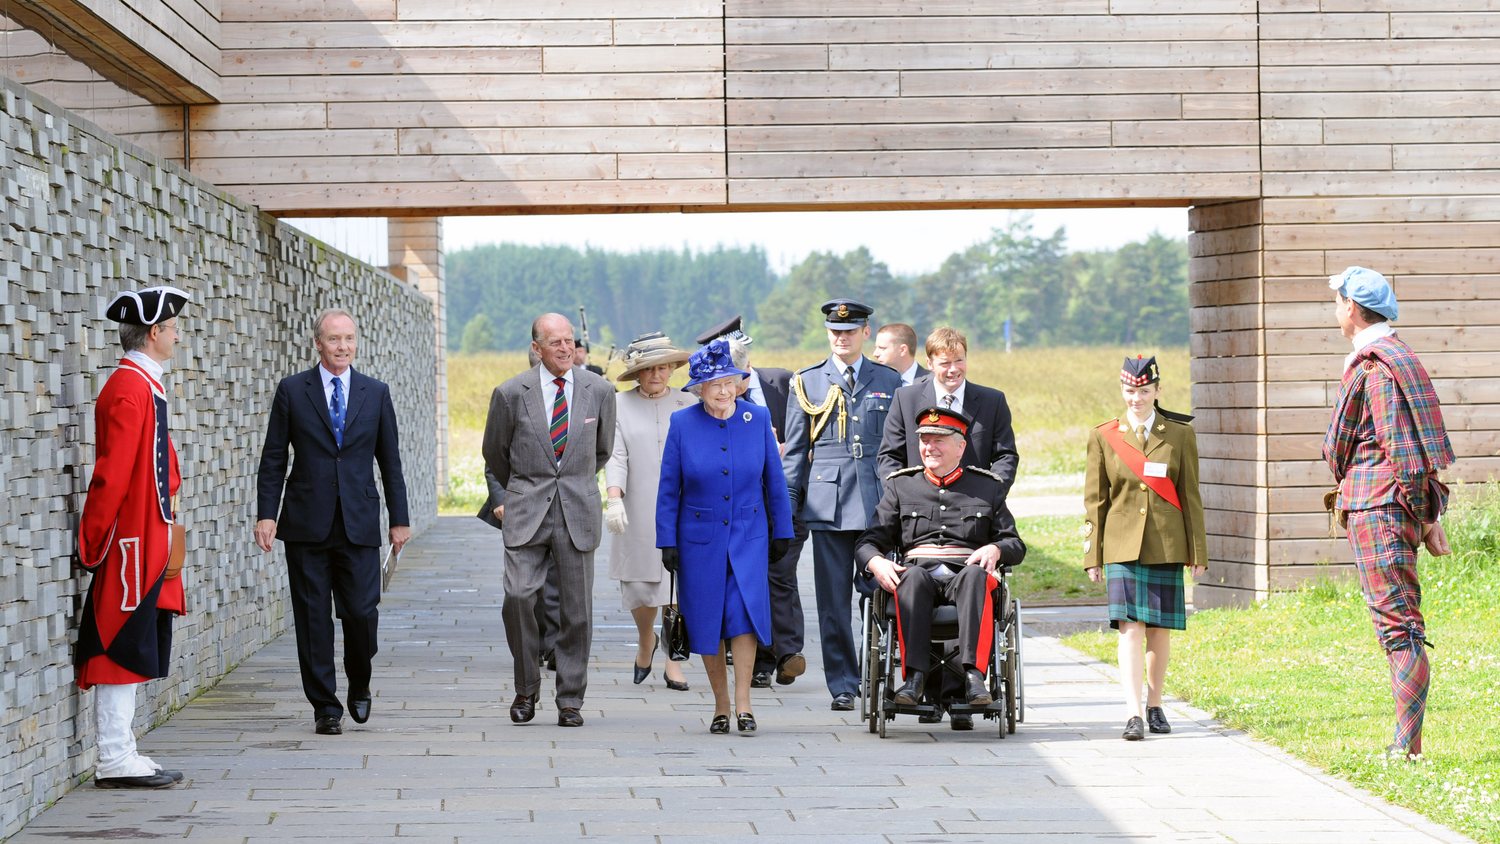 Her Majesty The Queen, the Duke of Edinburgh and a large delegation of official people walk along the wide path outside the new visitor centre at Culloden. The Queen is in the centre, wearing a blue hat and dress.